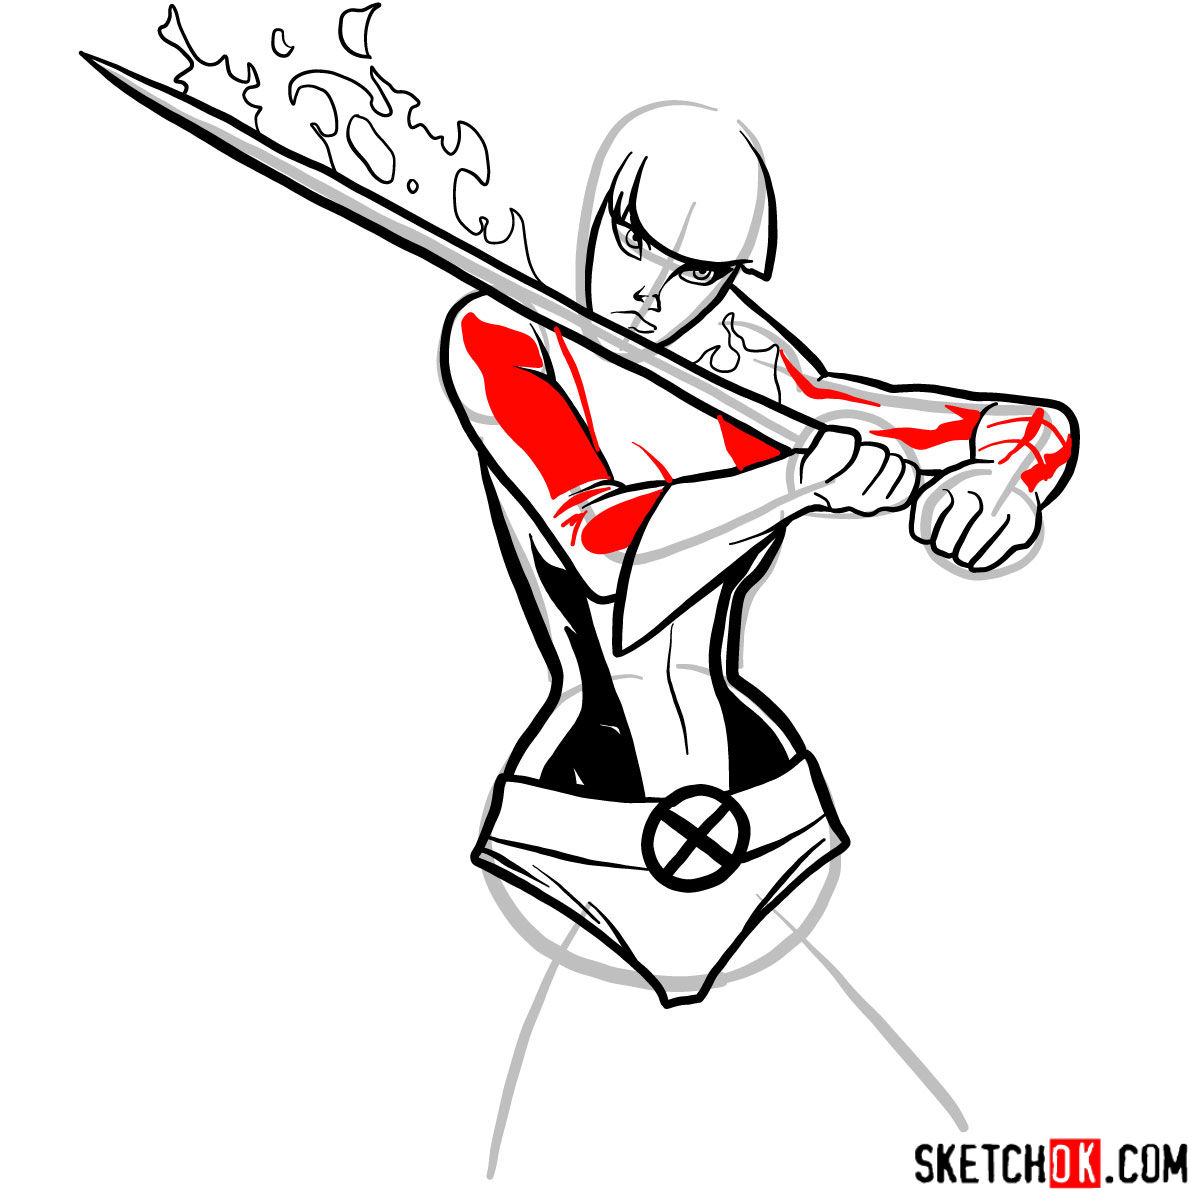 How to draw Magik, a mutant from X-Men - step 09